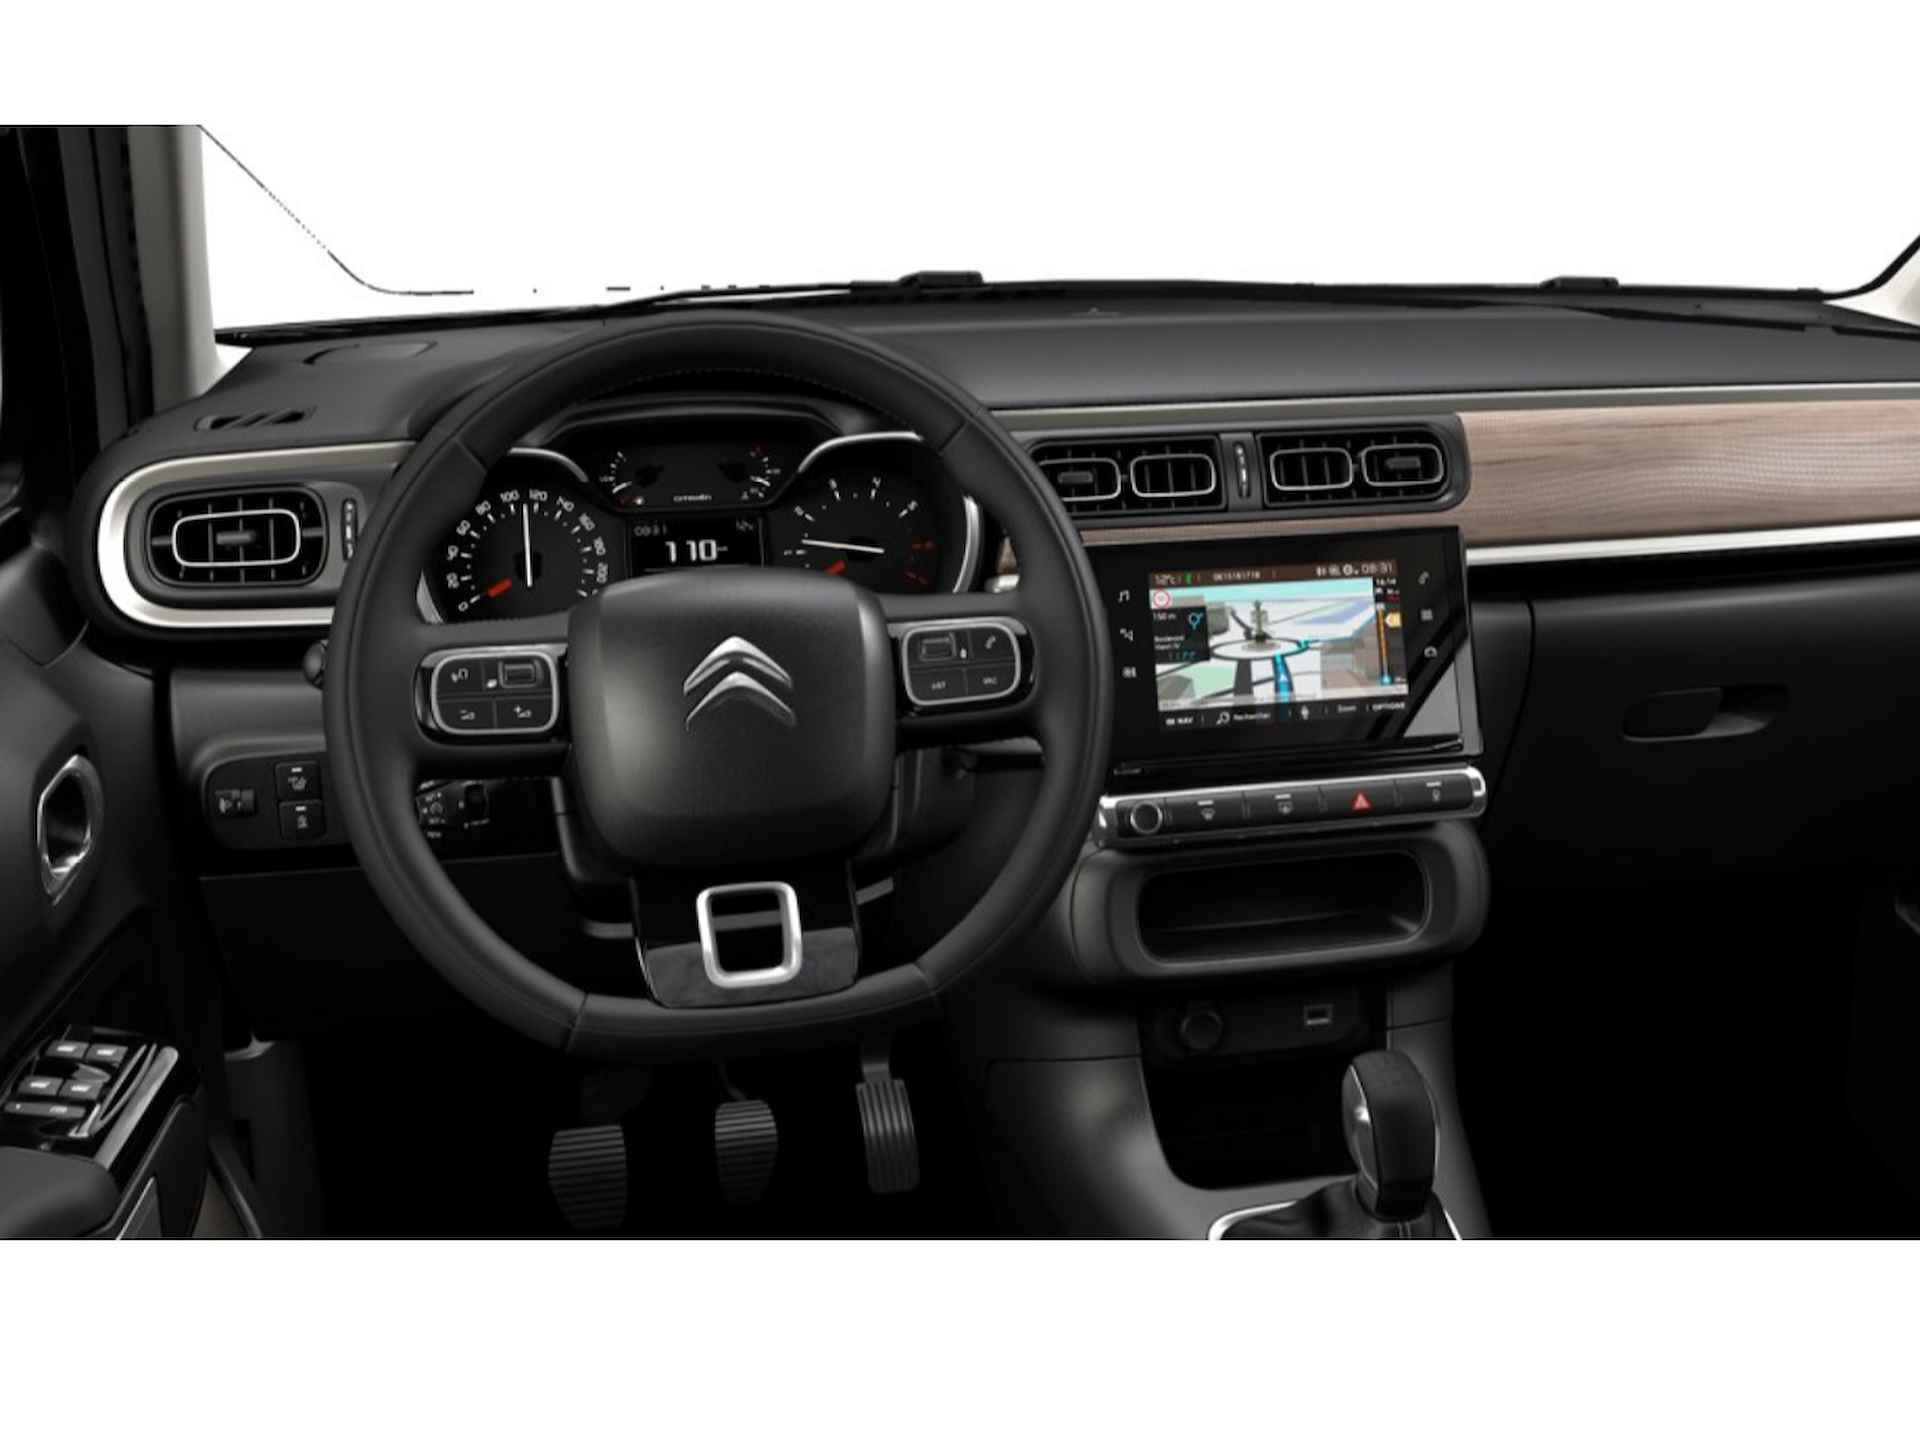 Citroën C3 1.2 PureTech Feel Edition | Ambiance Wood | Connect Nav DAB + 7” Touchscreen - 6/8